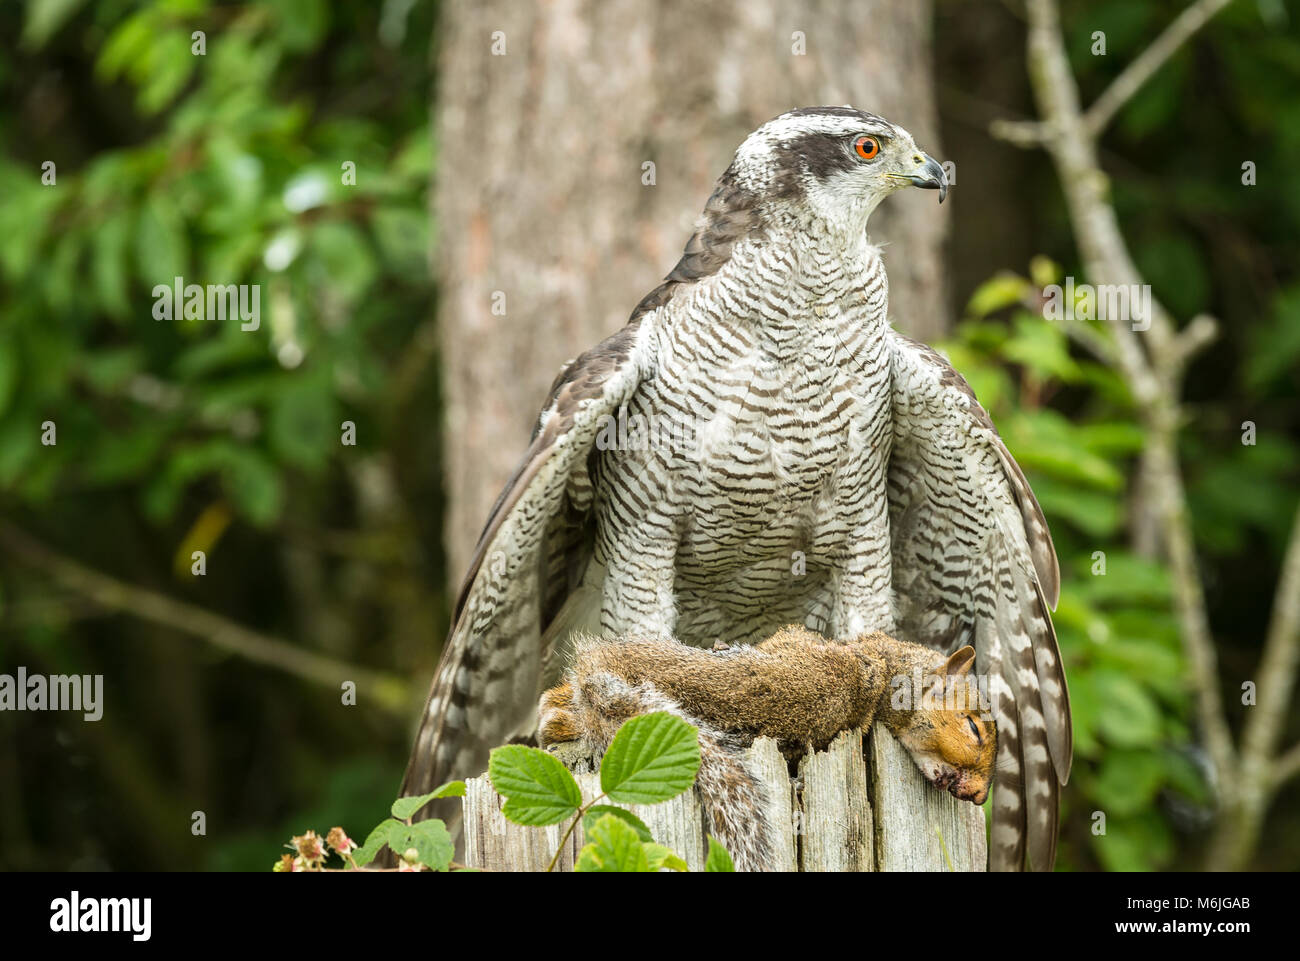 Goshawk on squirrel in woodland setting.  The Goshawk is perched on an old fencepost with a grey squirrel in its talons. Stock Photo